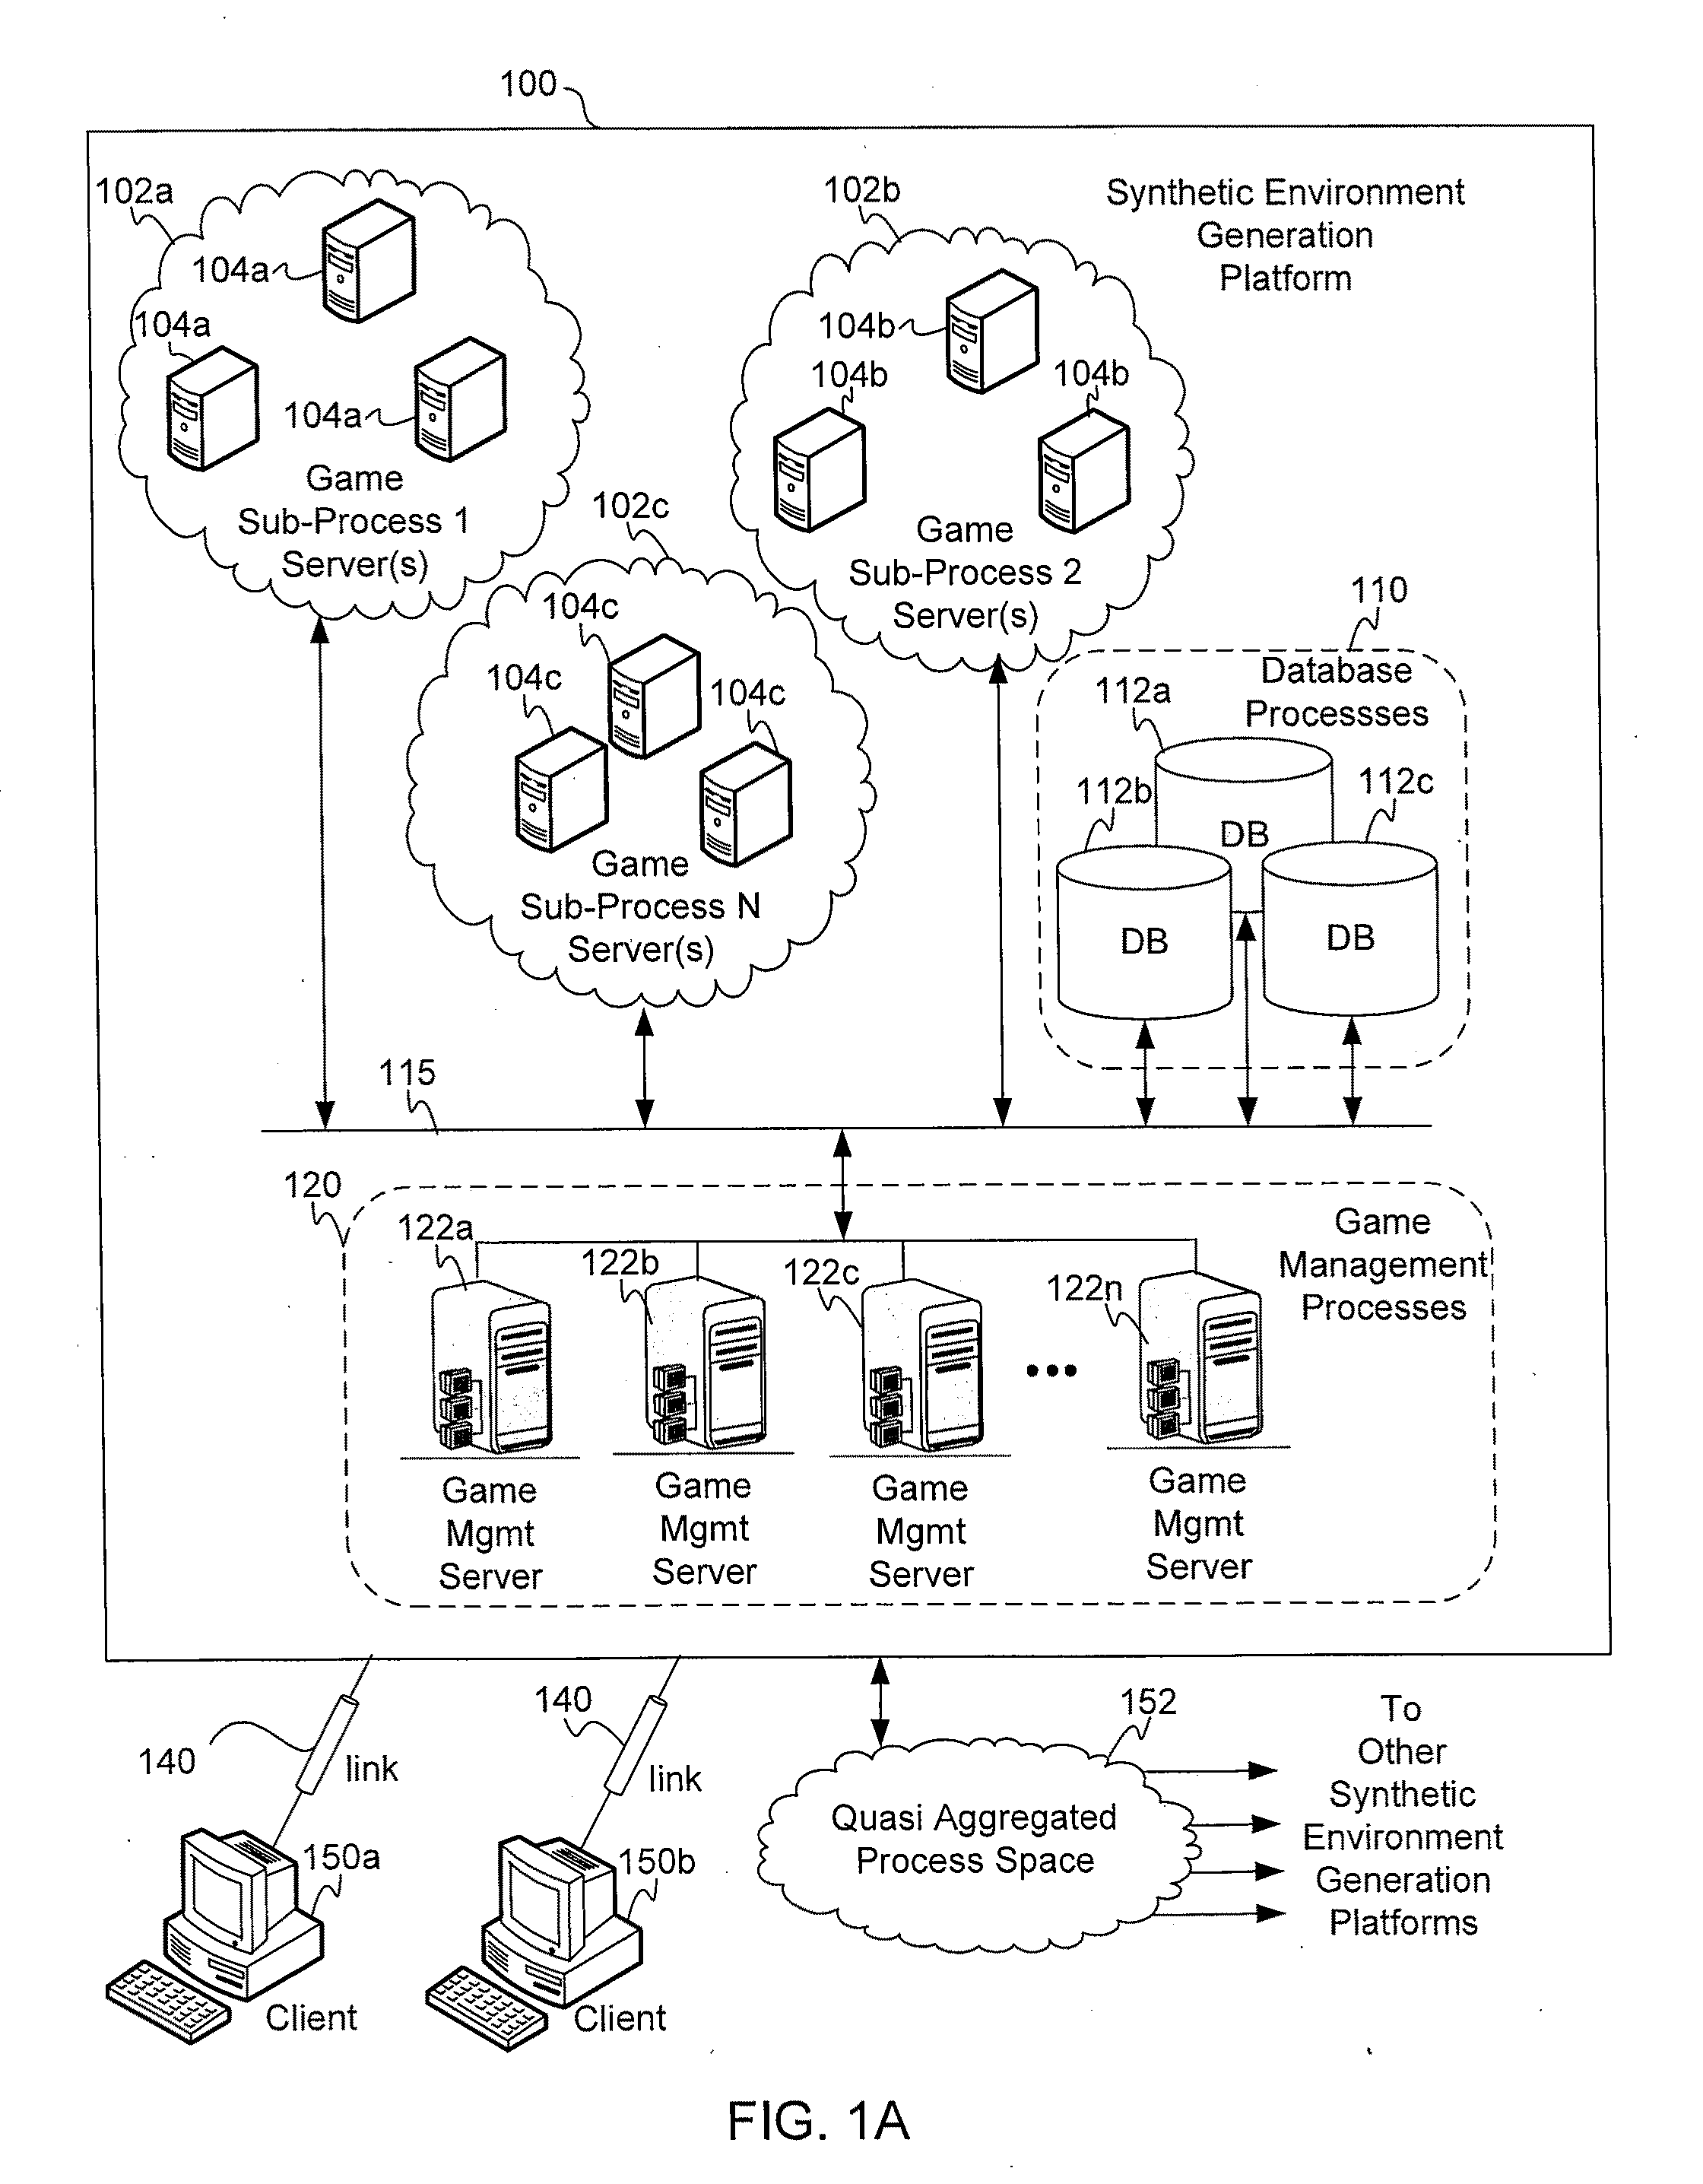 Apparatus, method, and computer readable media to perform transactions in association with participants interacting in a synthetic environment